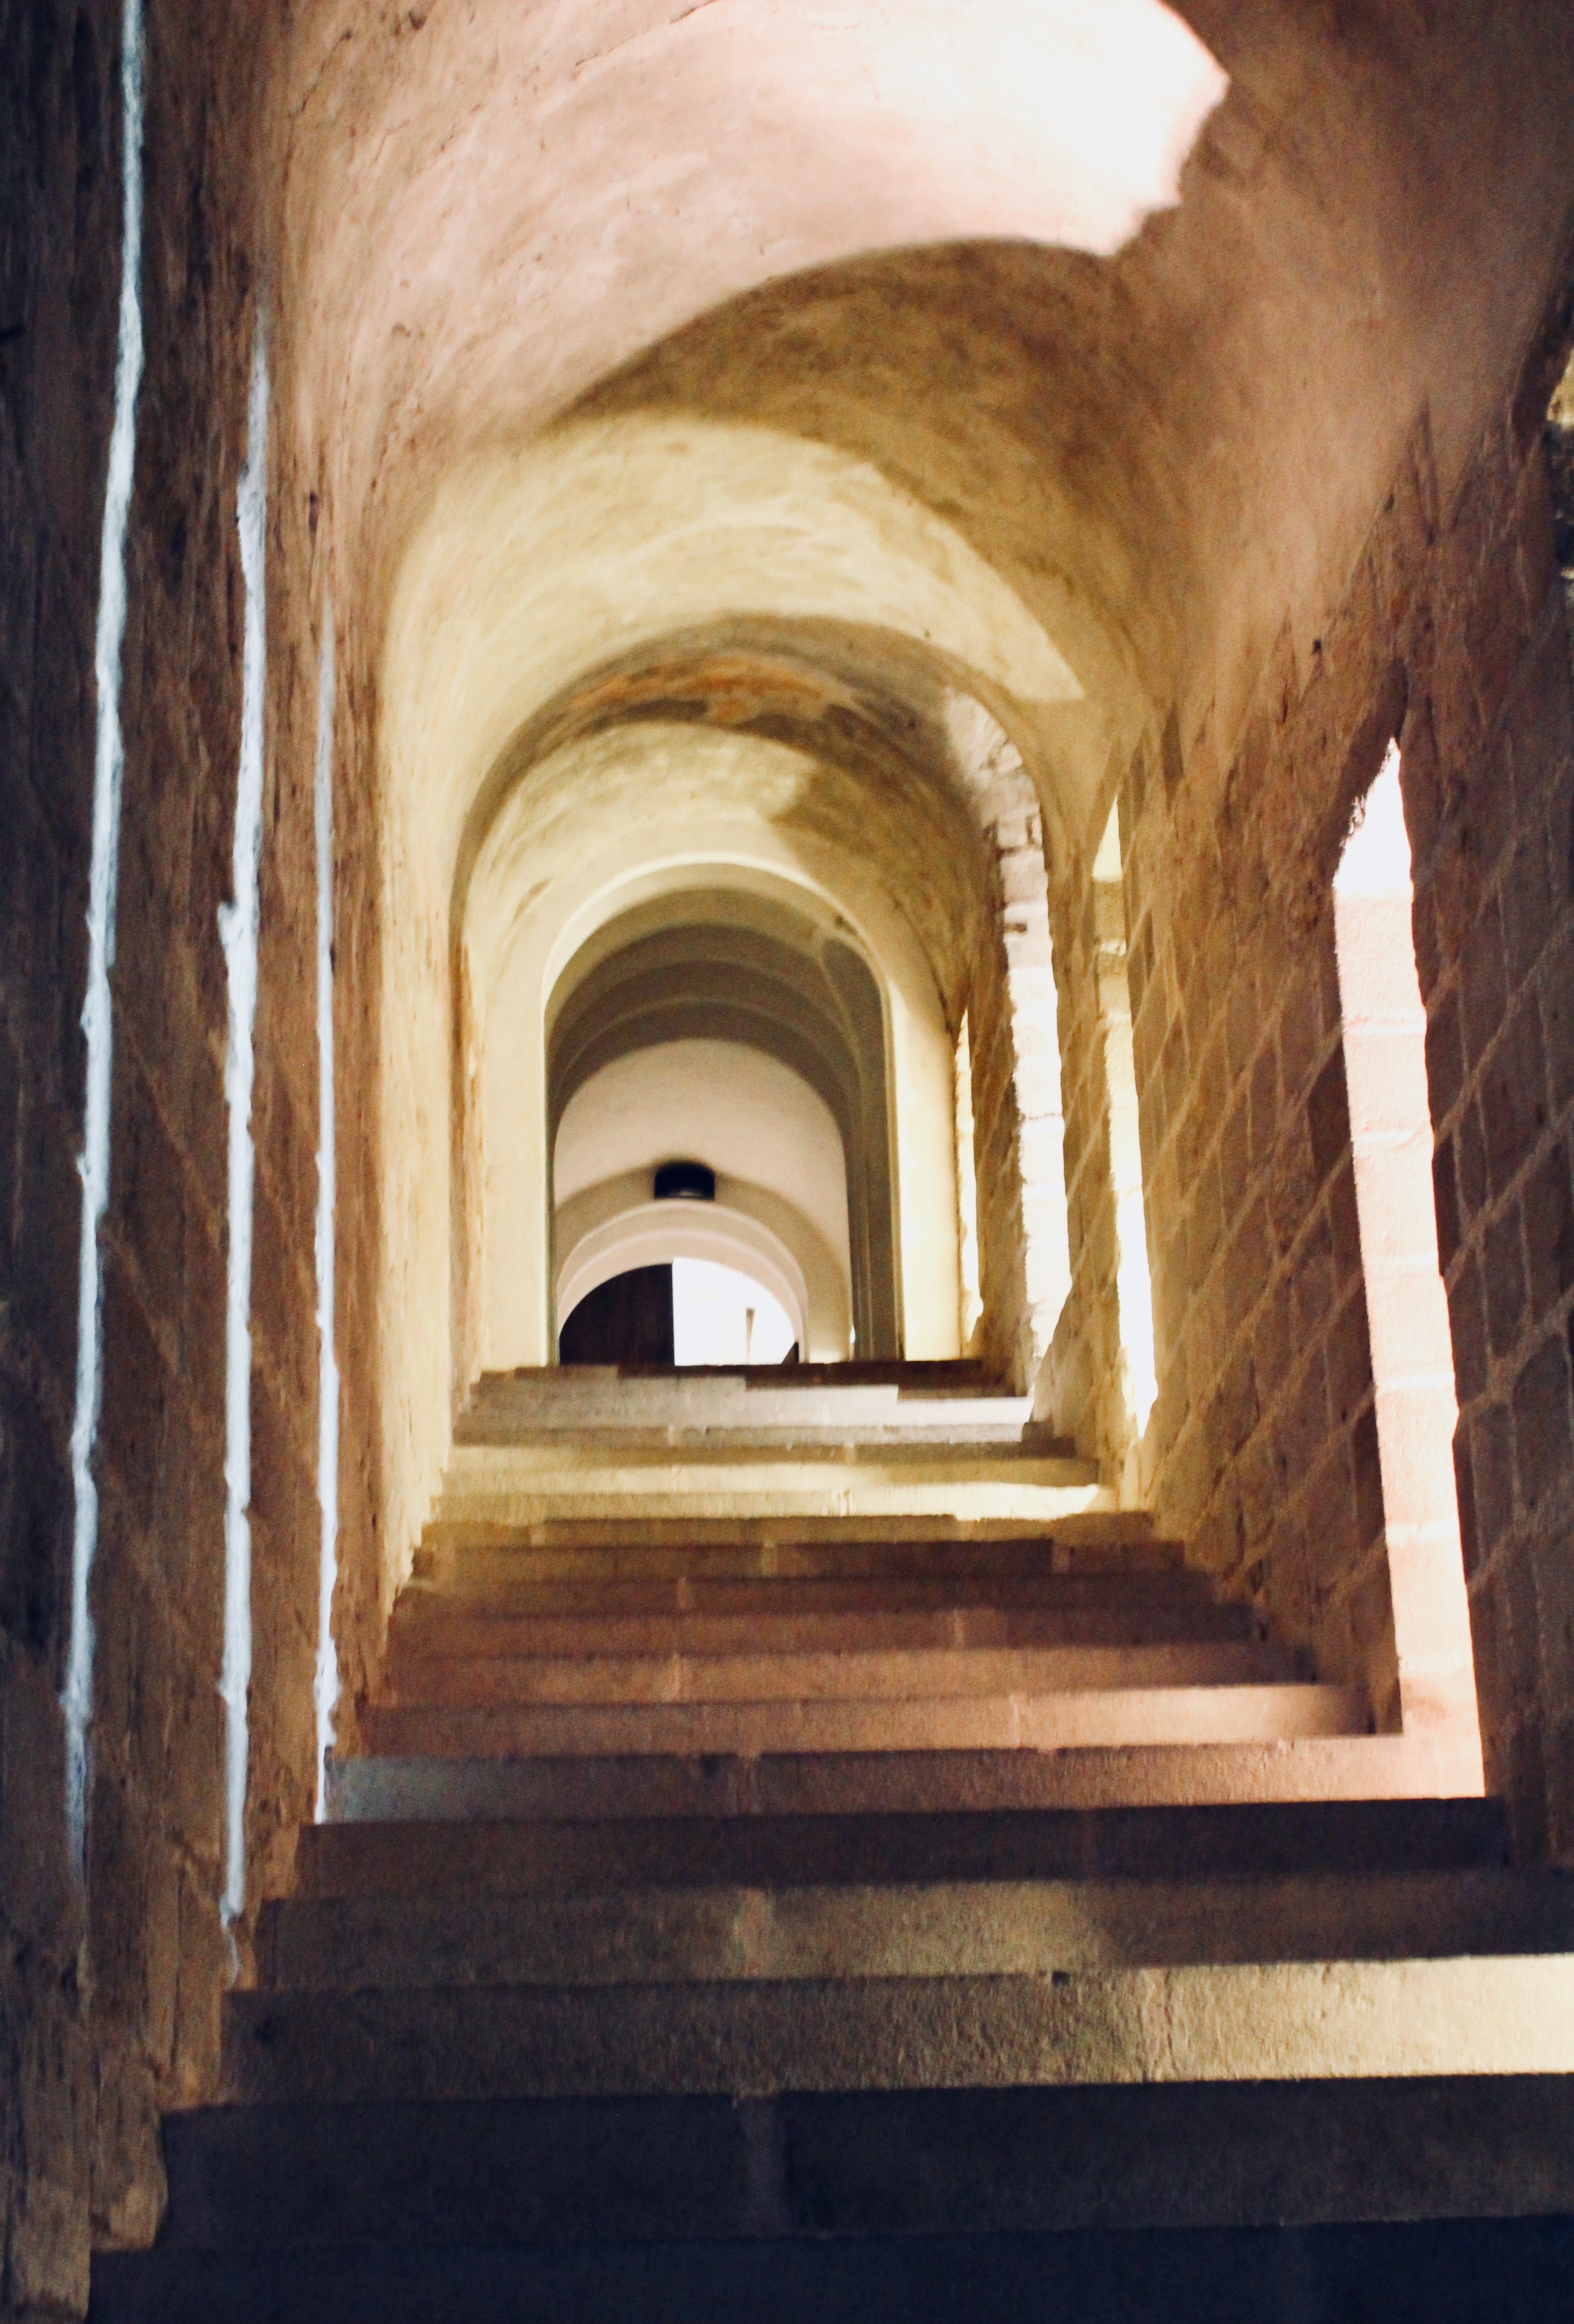 narrow stone staircase with arched ceiling and open windows on the right side